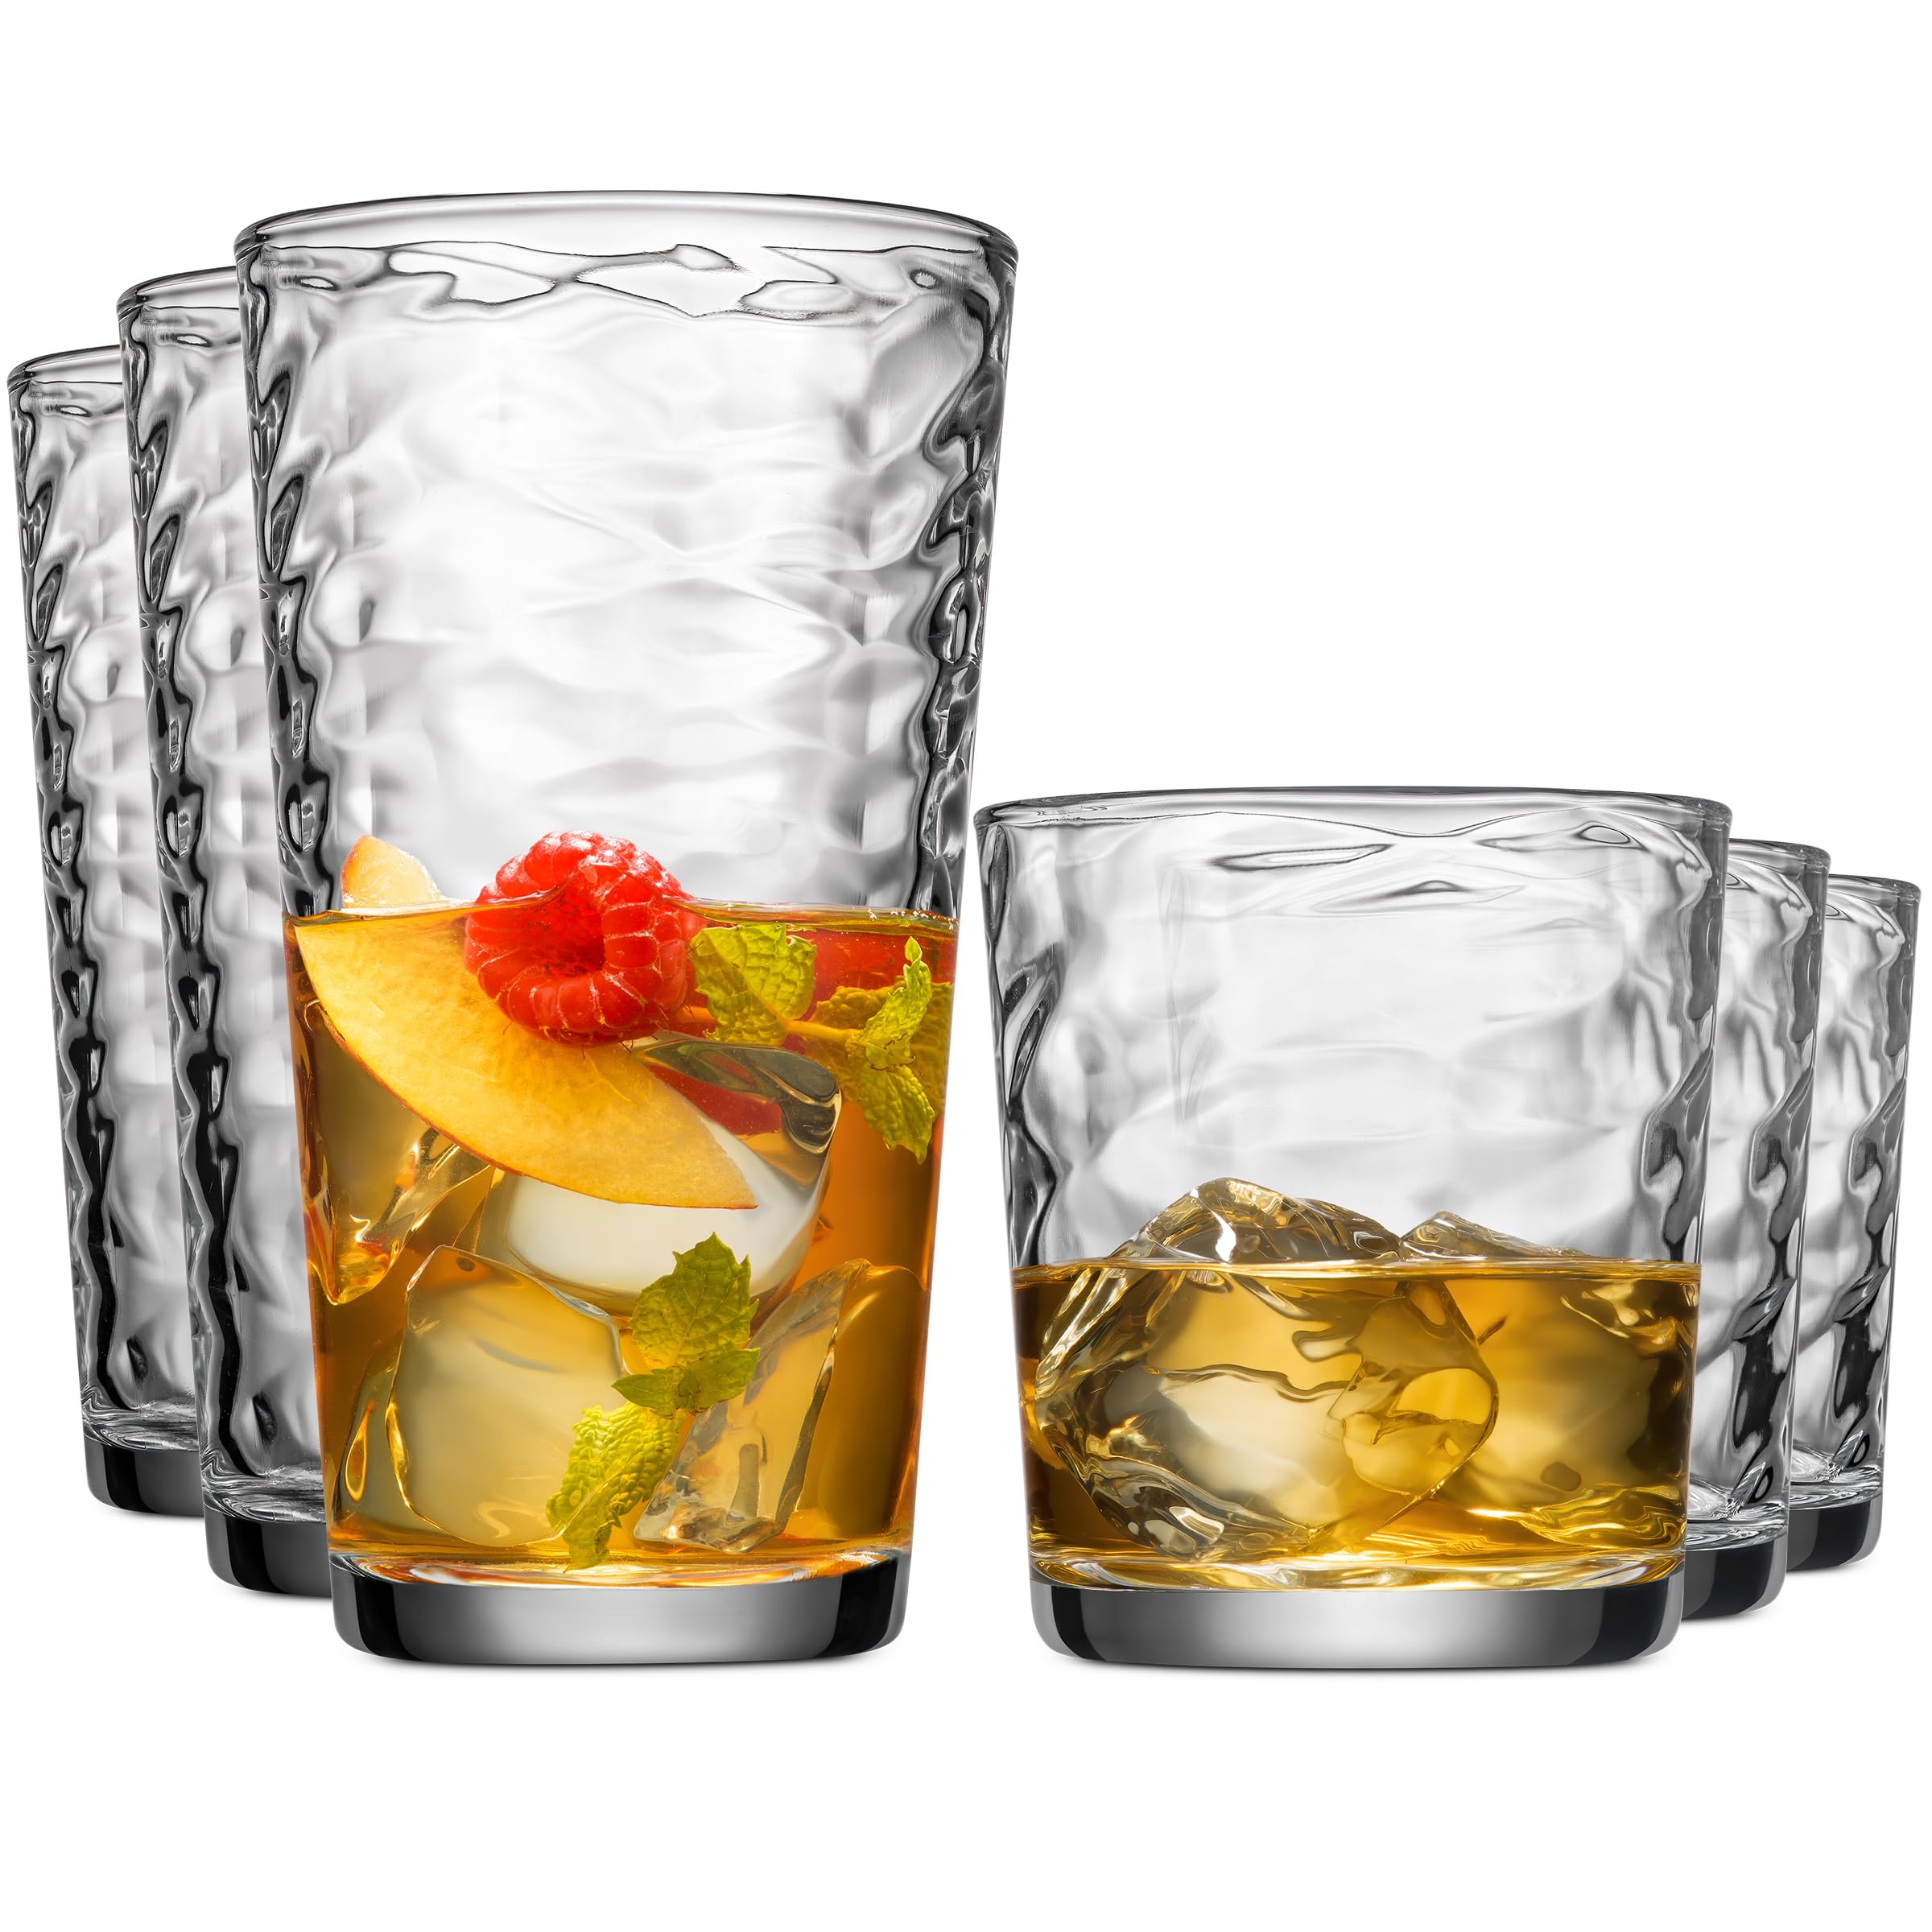 Glaver's Glassware Set of 8 Drinking Glasses, 4-17 Oz Highball Glasses and 4-13 oz. Whiskey Glasses. Origami Kitchen Glass Cups for Home Bar Uses Water, Juice, and Cocktails.